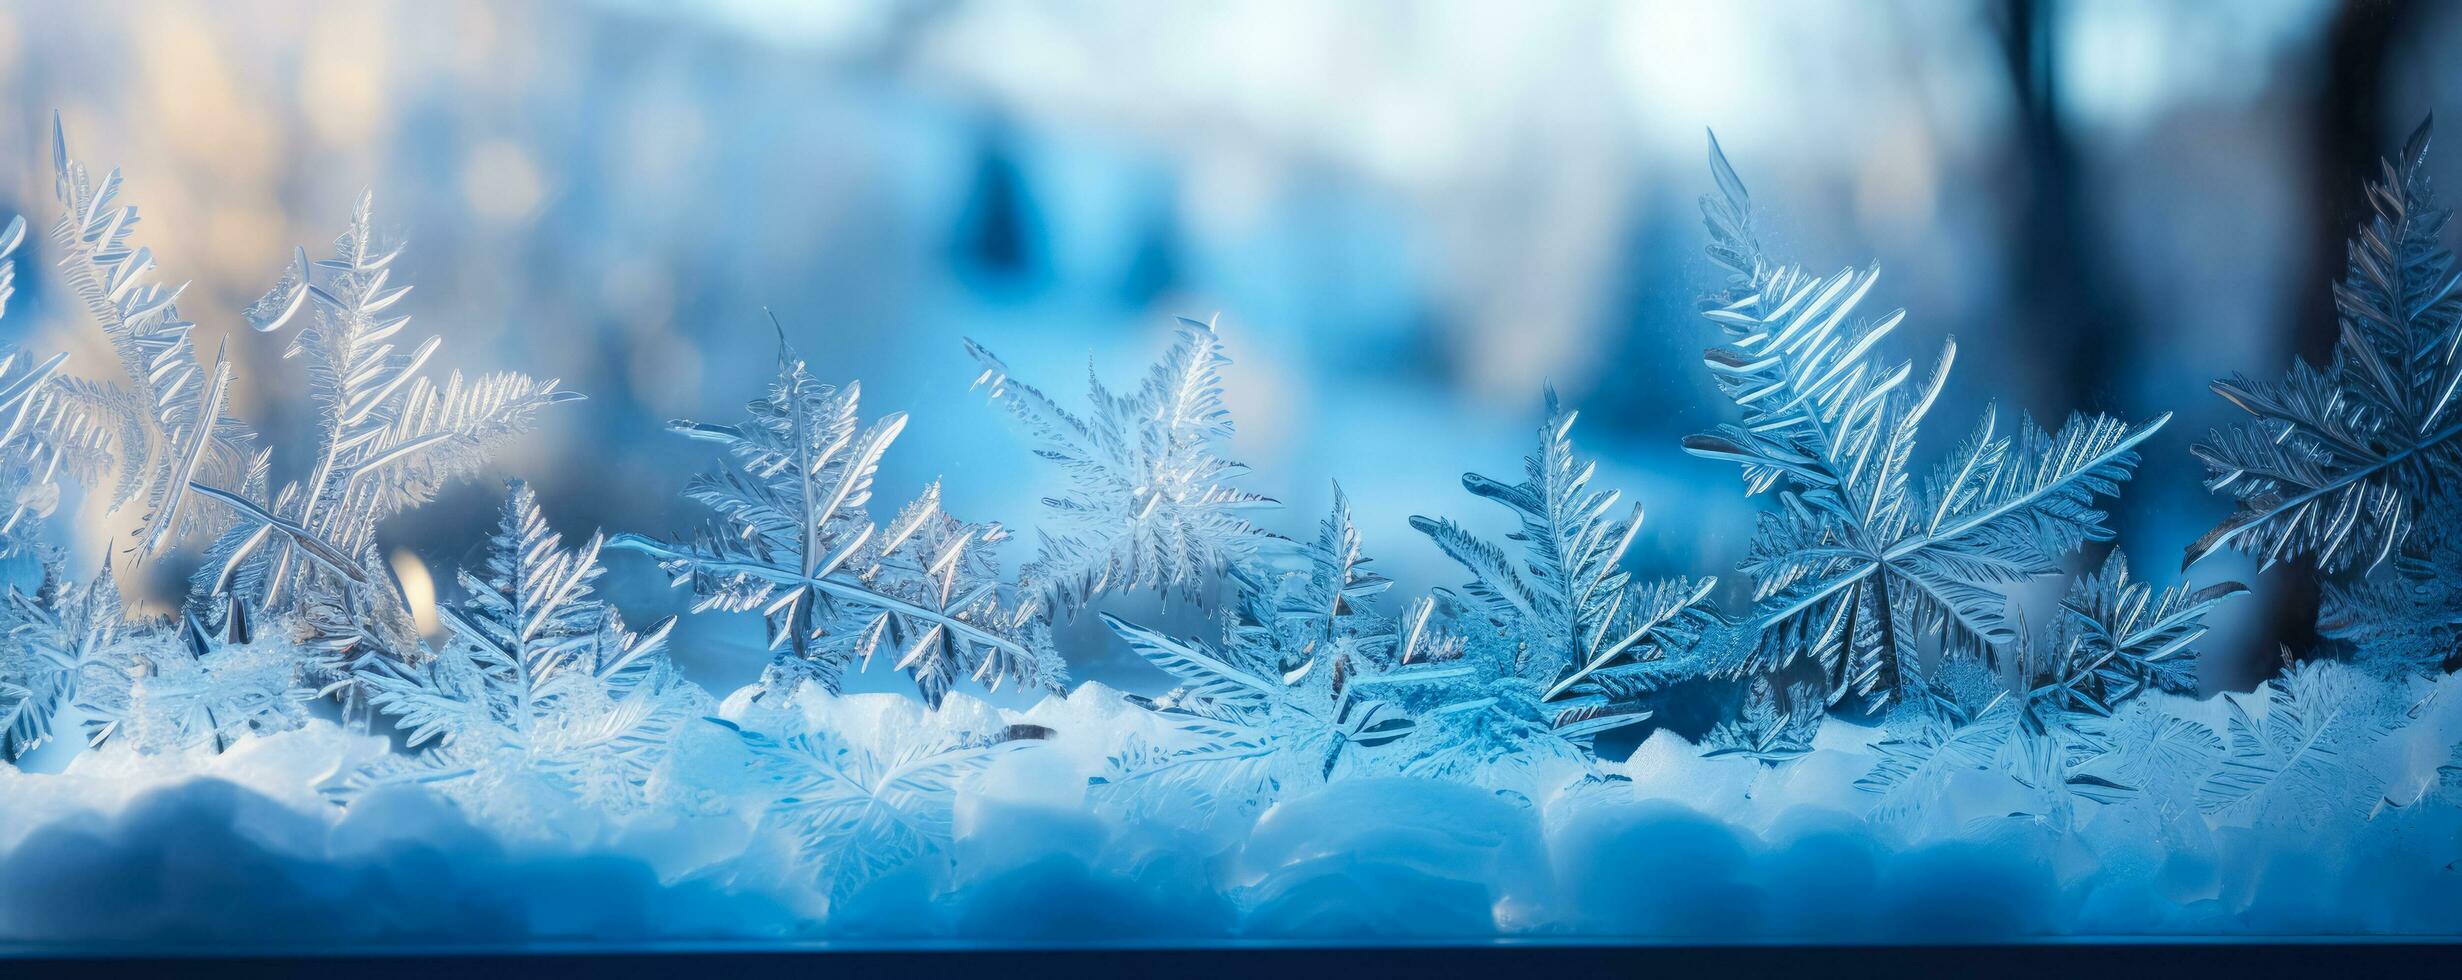 Elaborate frost patterns on winter windowpanes background with empty space for text photo